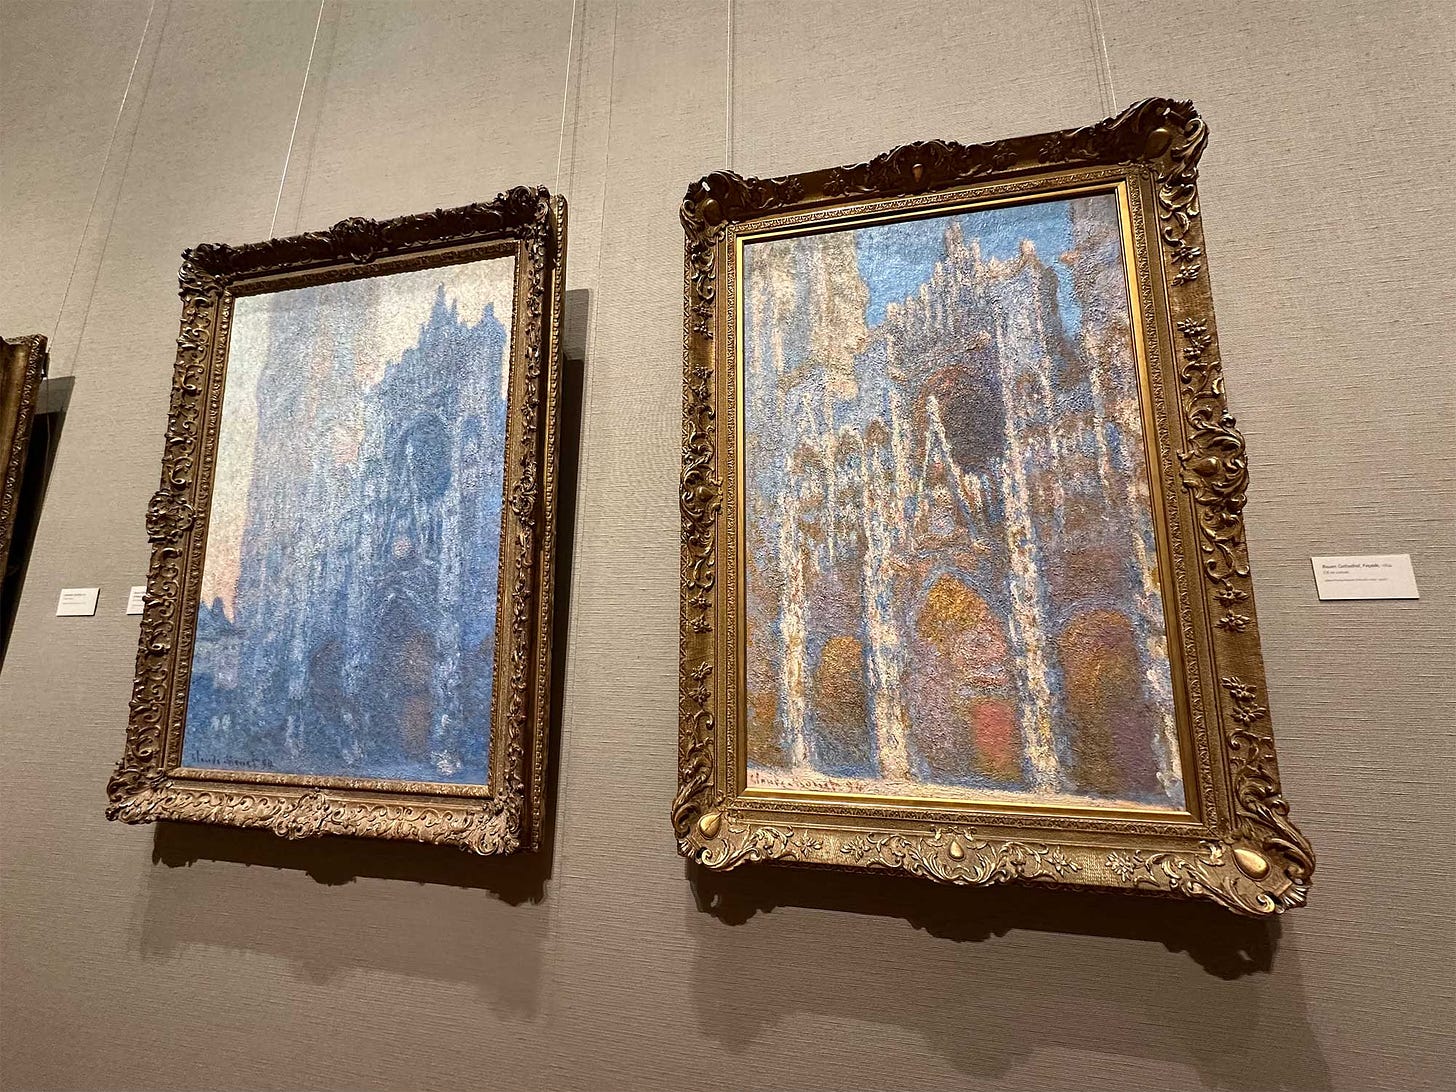 Two paintings, displayed side by side, of the facade of the Rouen Cathedral shown under different light conditions by the artist.